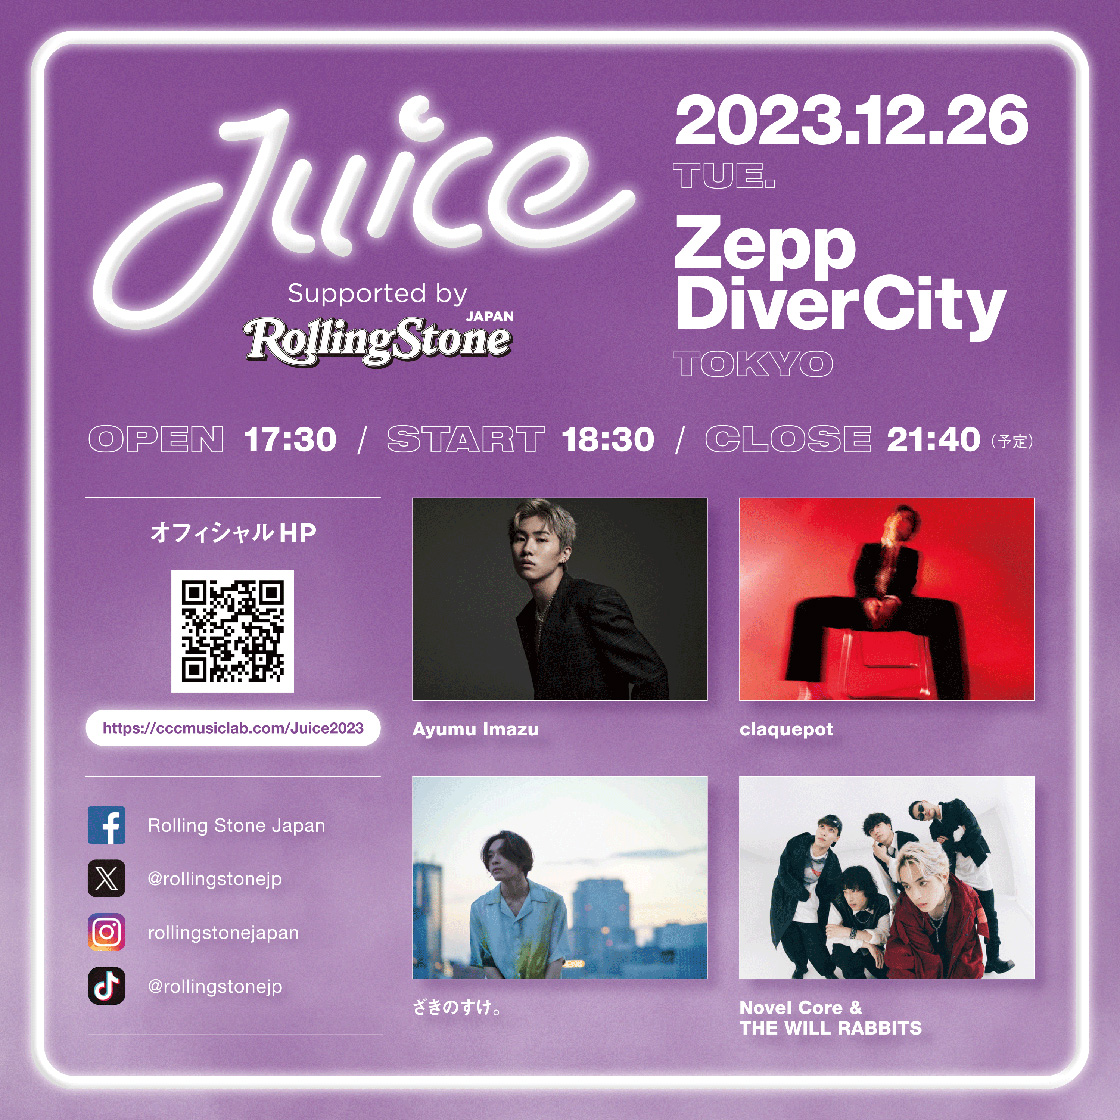 claquepot X「Juice Supported by Rolling Stone Japan」2023.12.26 